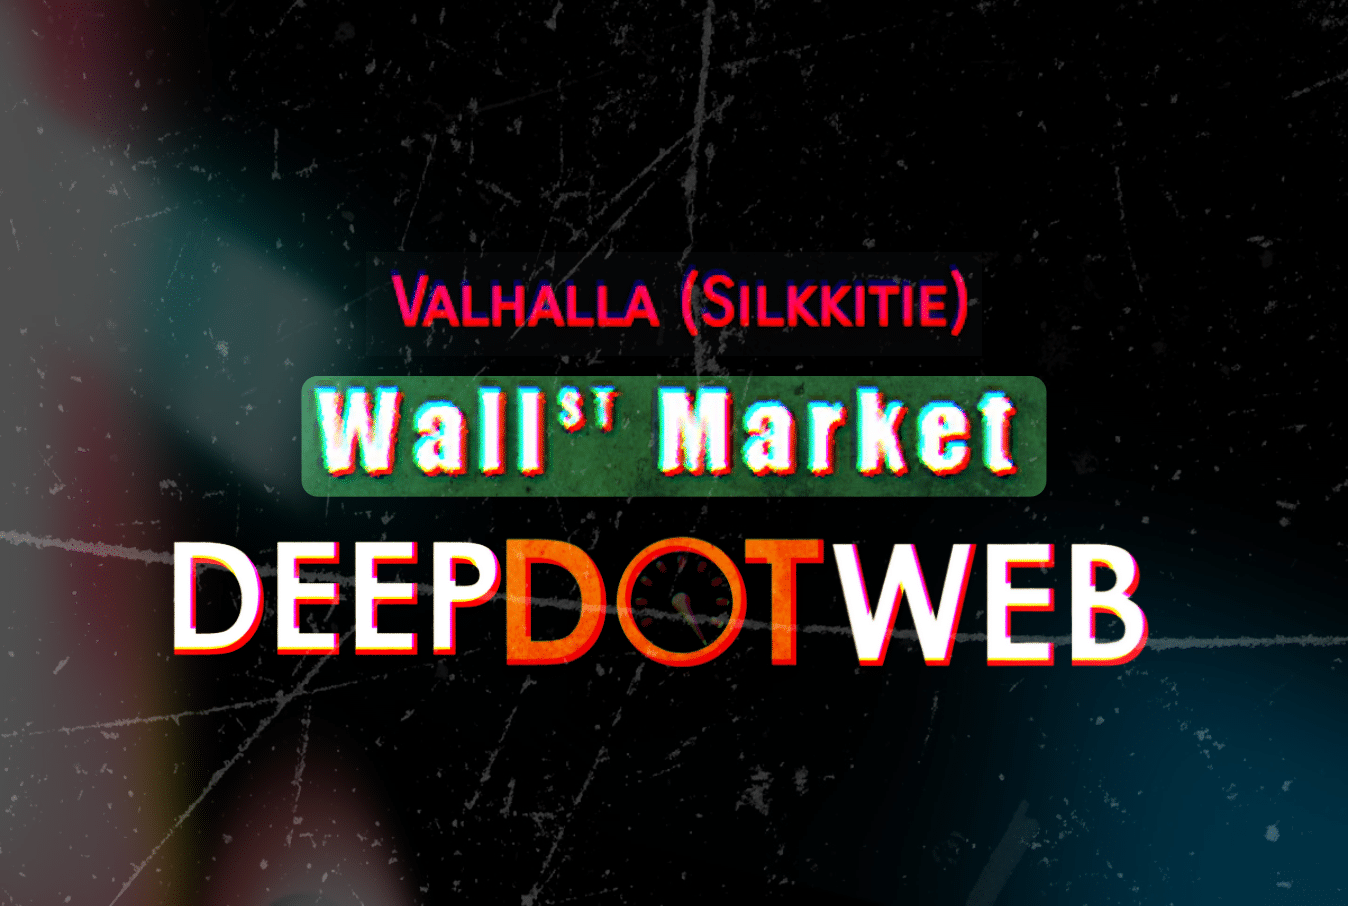 DeepDotWeb, Wall St and Valhalla markets seized by authorities